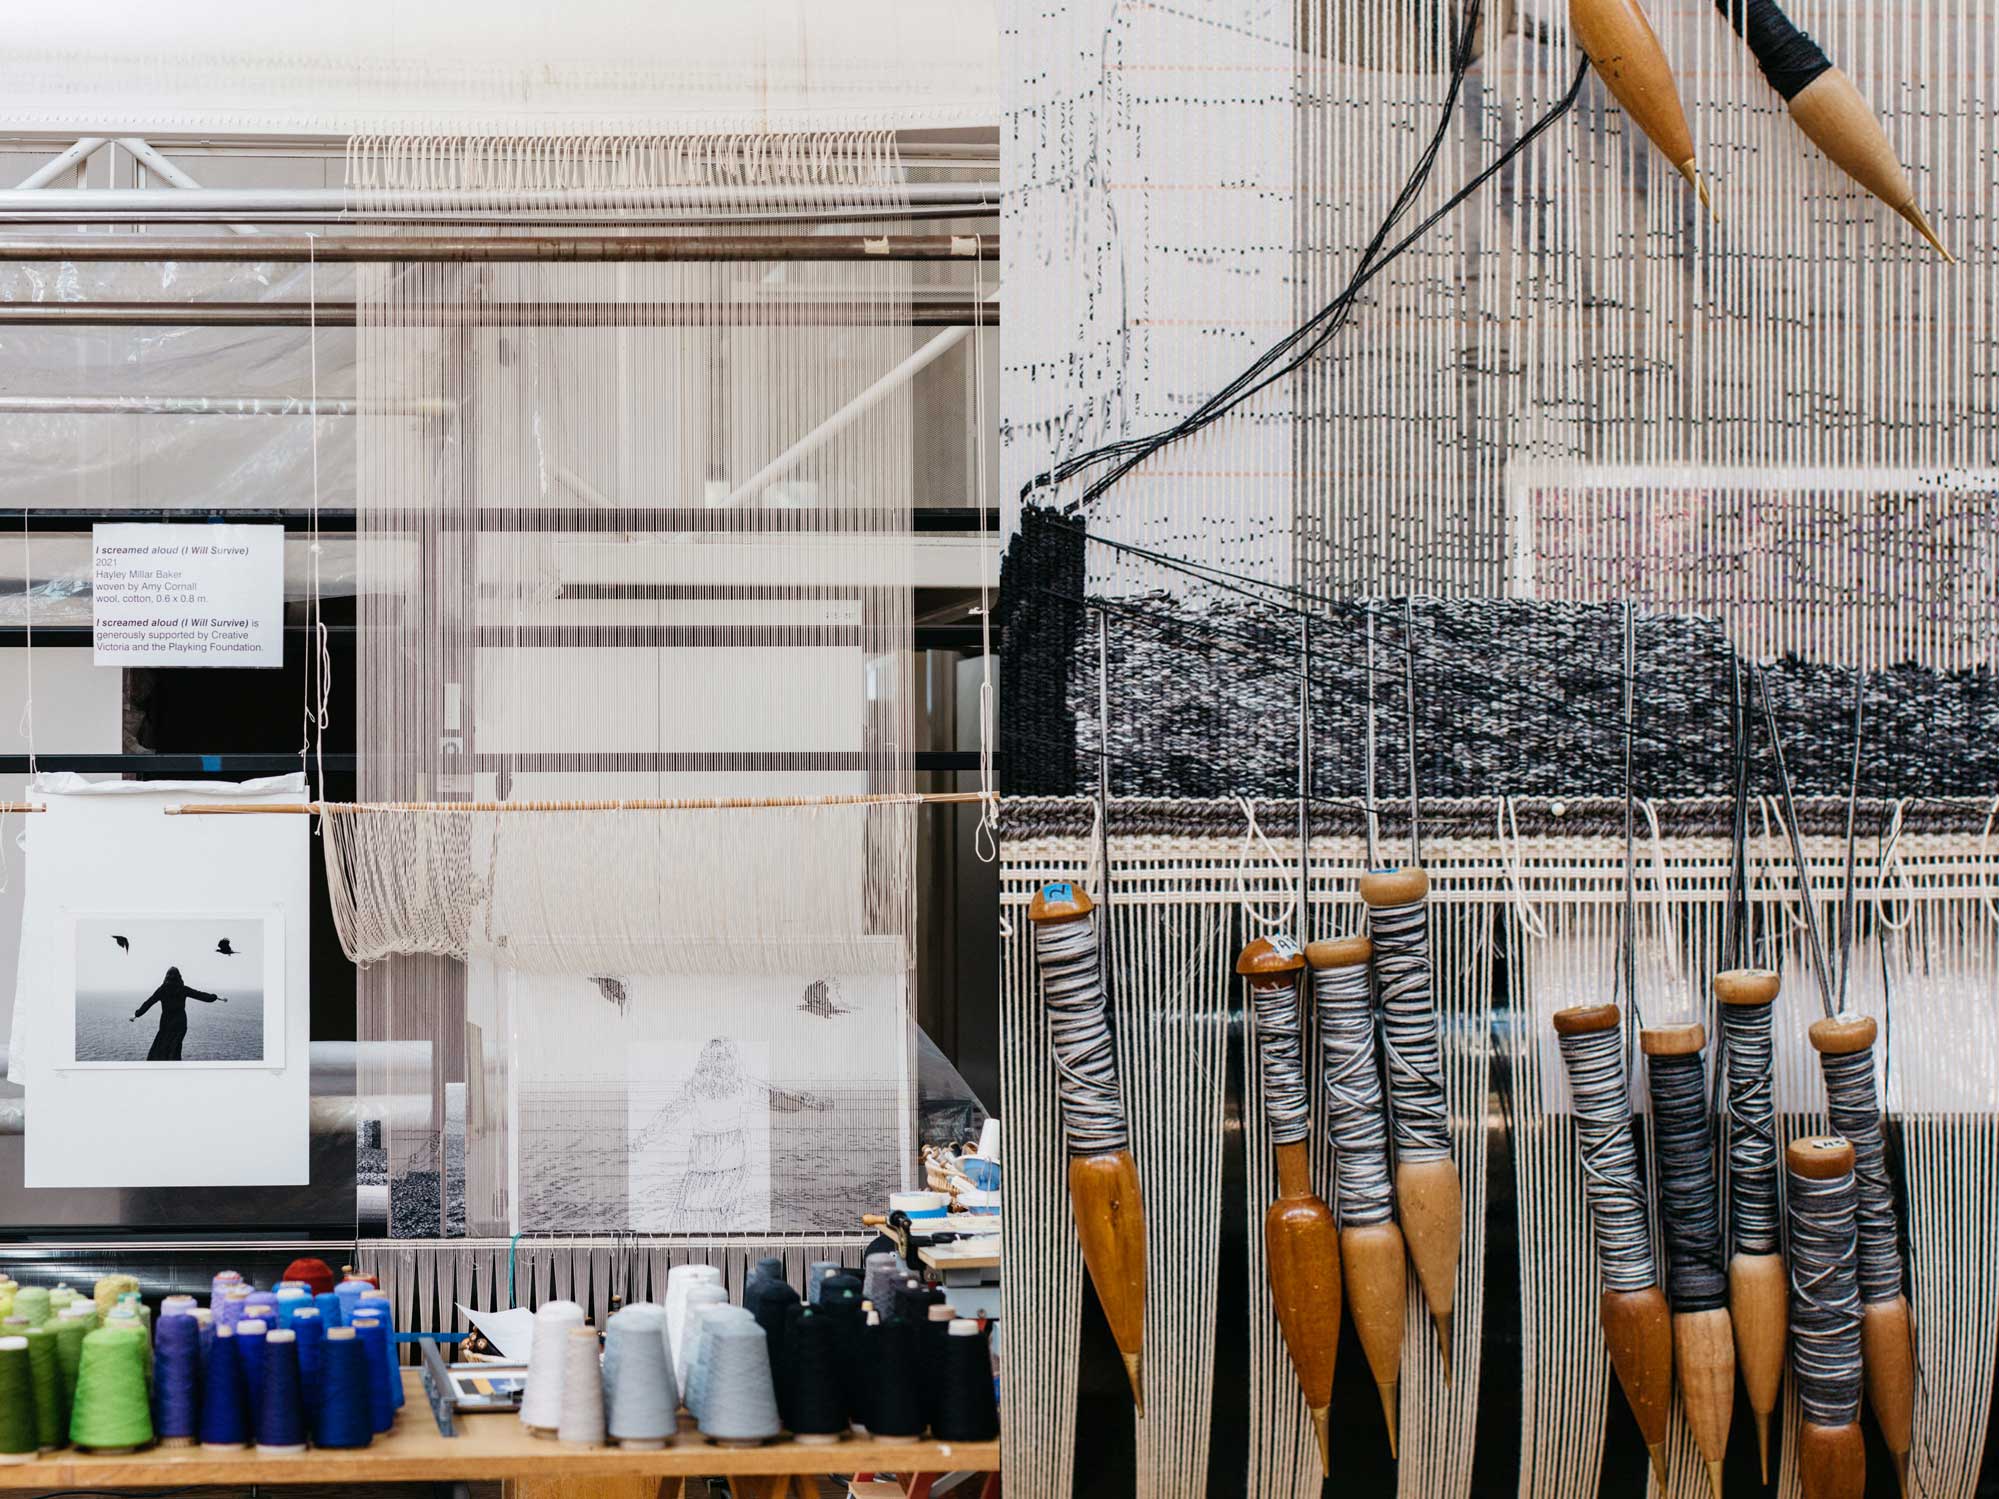 Tapestry in Progress: 'I screamed aloud (I Will Survive)', 2021, designed by Hayley Millar Baker, woven by Amy Cornall. Images courtesy of Marie-Luise Skibbe.